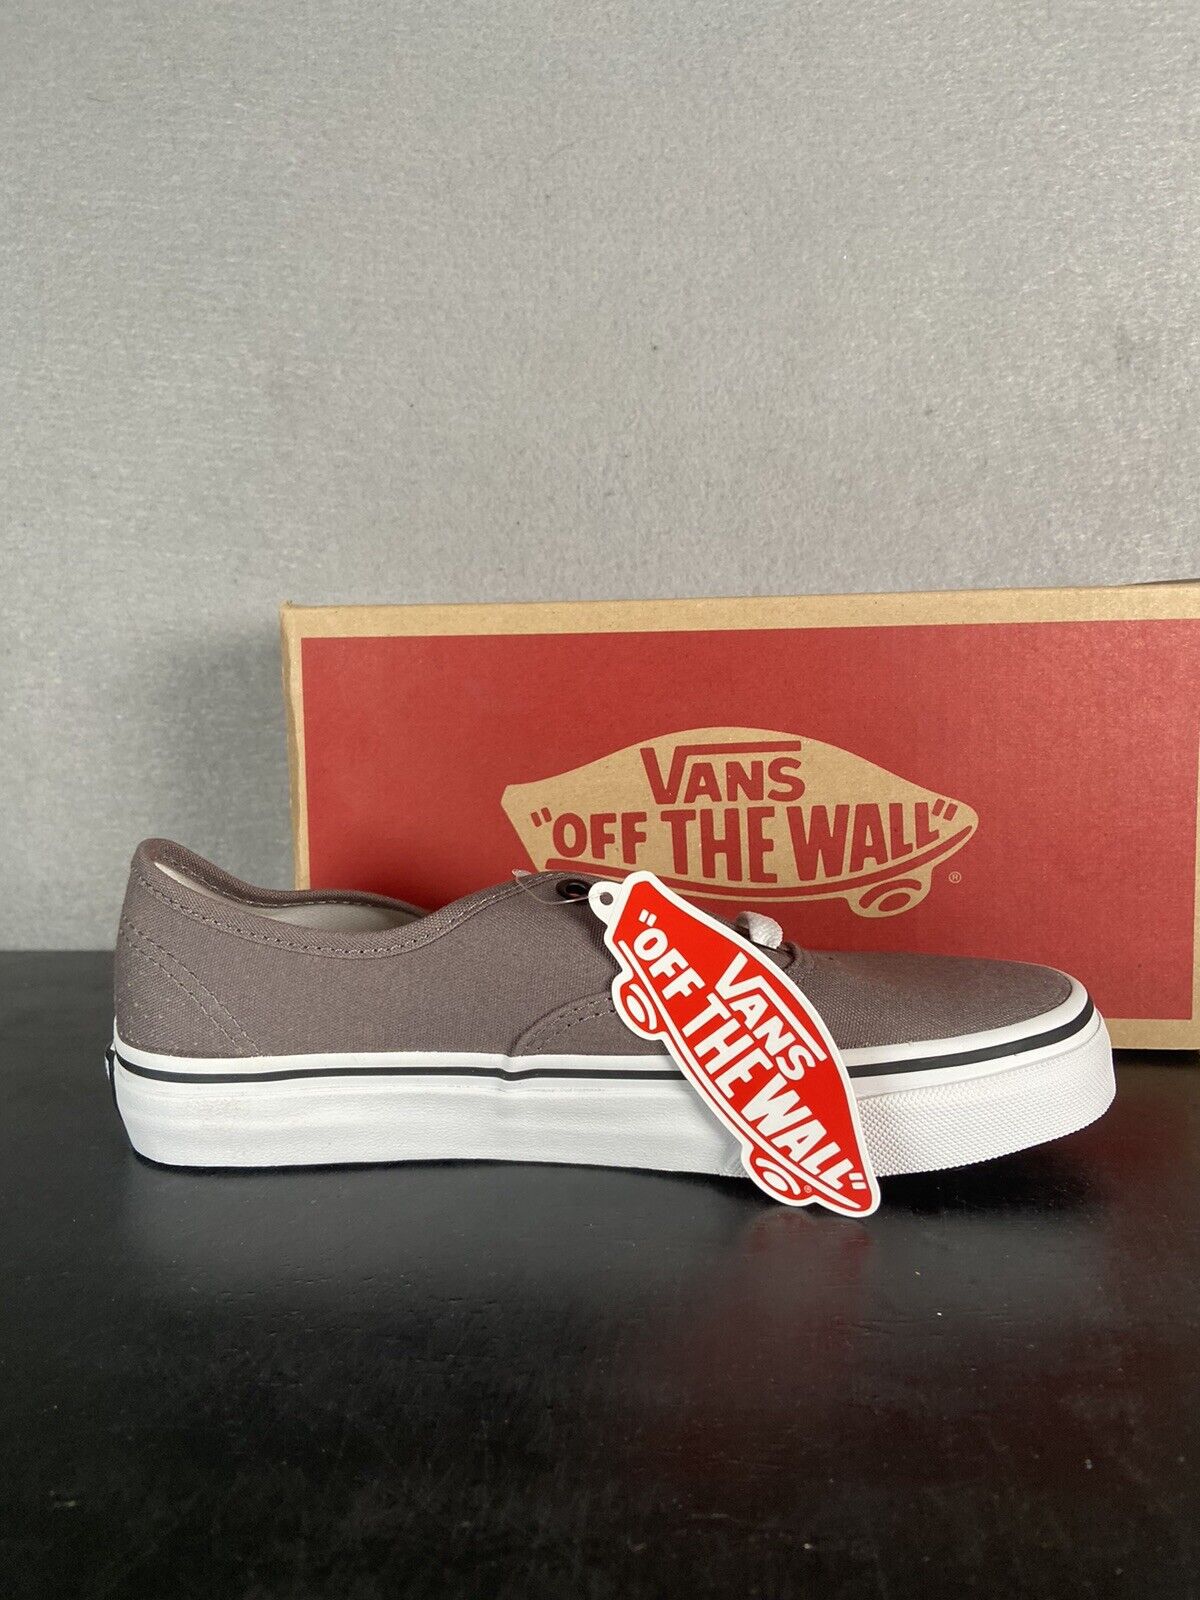 Vans New Authentic Classic Sneakers Pewter Grey Canvas Shoes Men's Size 9.5 W 11